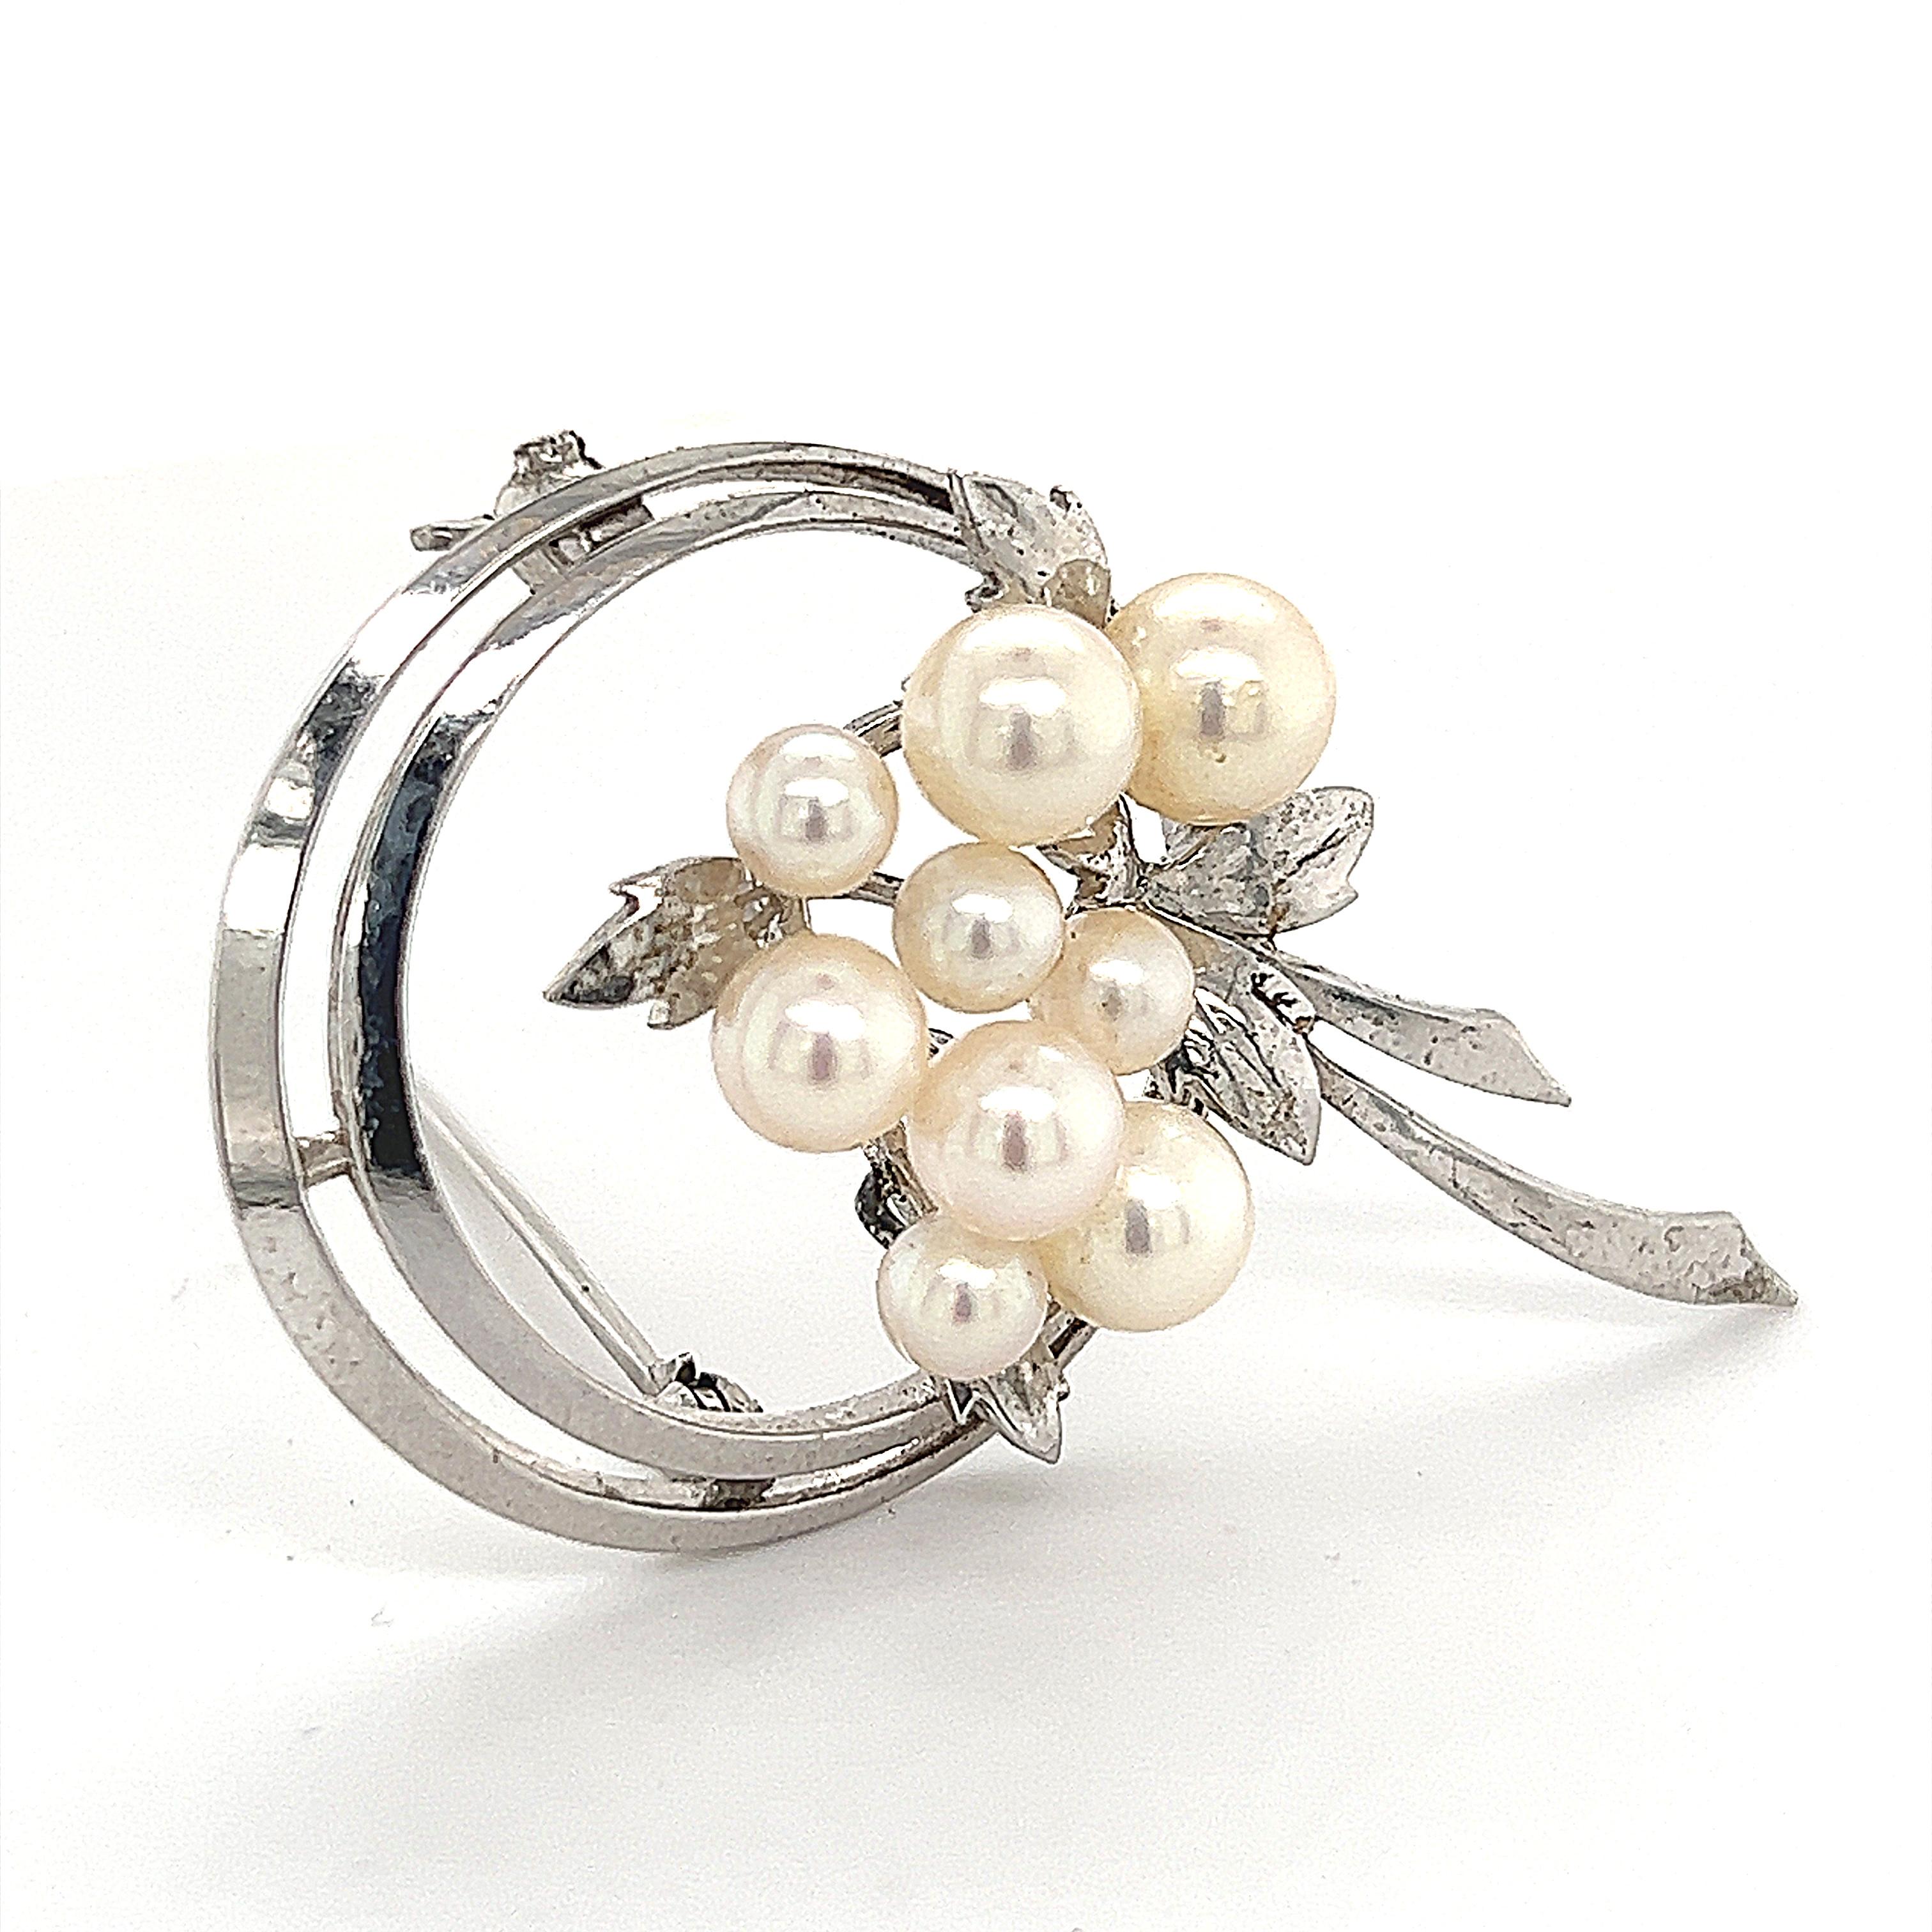 Mikimoto Estate Akoya Pearl Brooch Sterling Silver 6.25 mm 6.8g For Sale 3